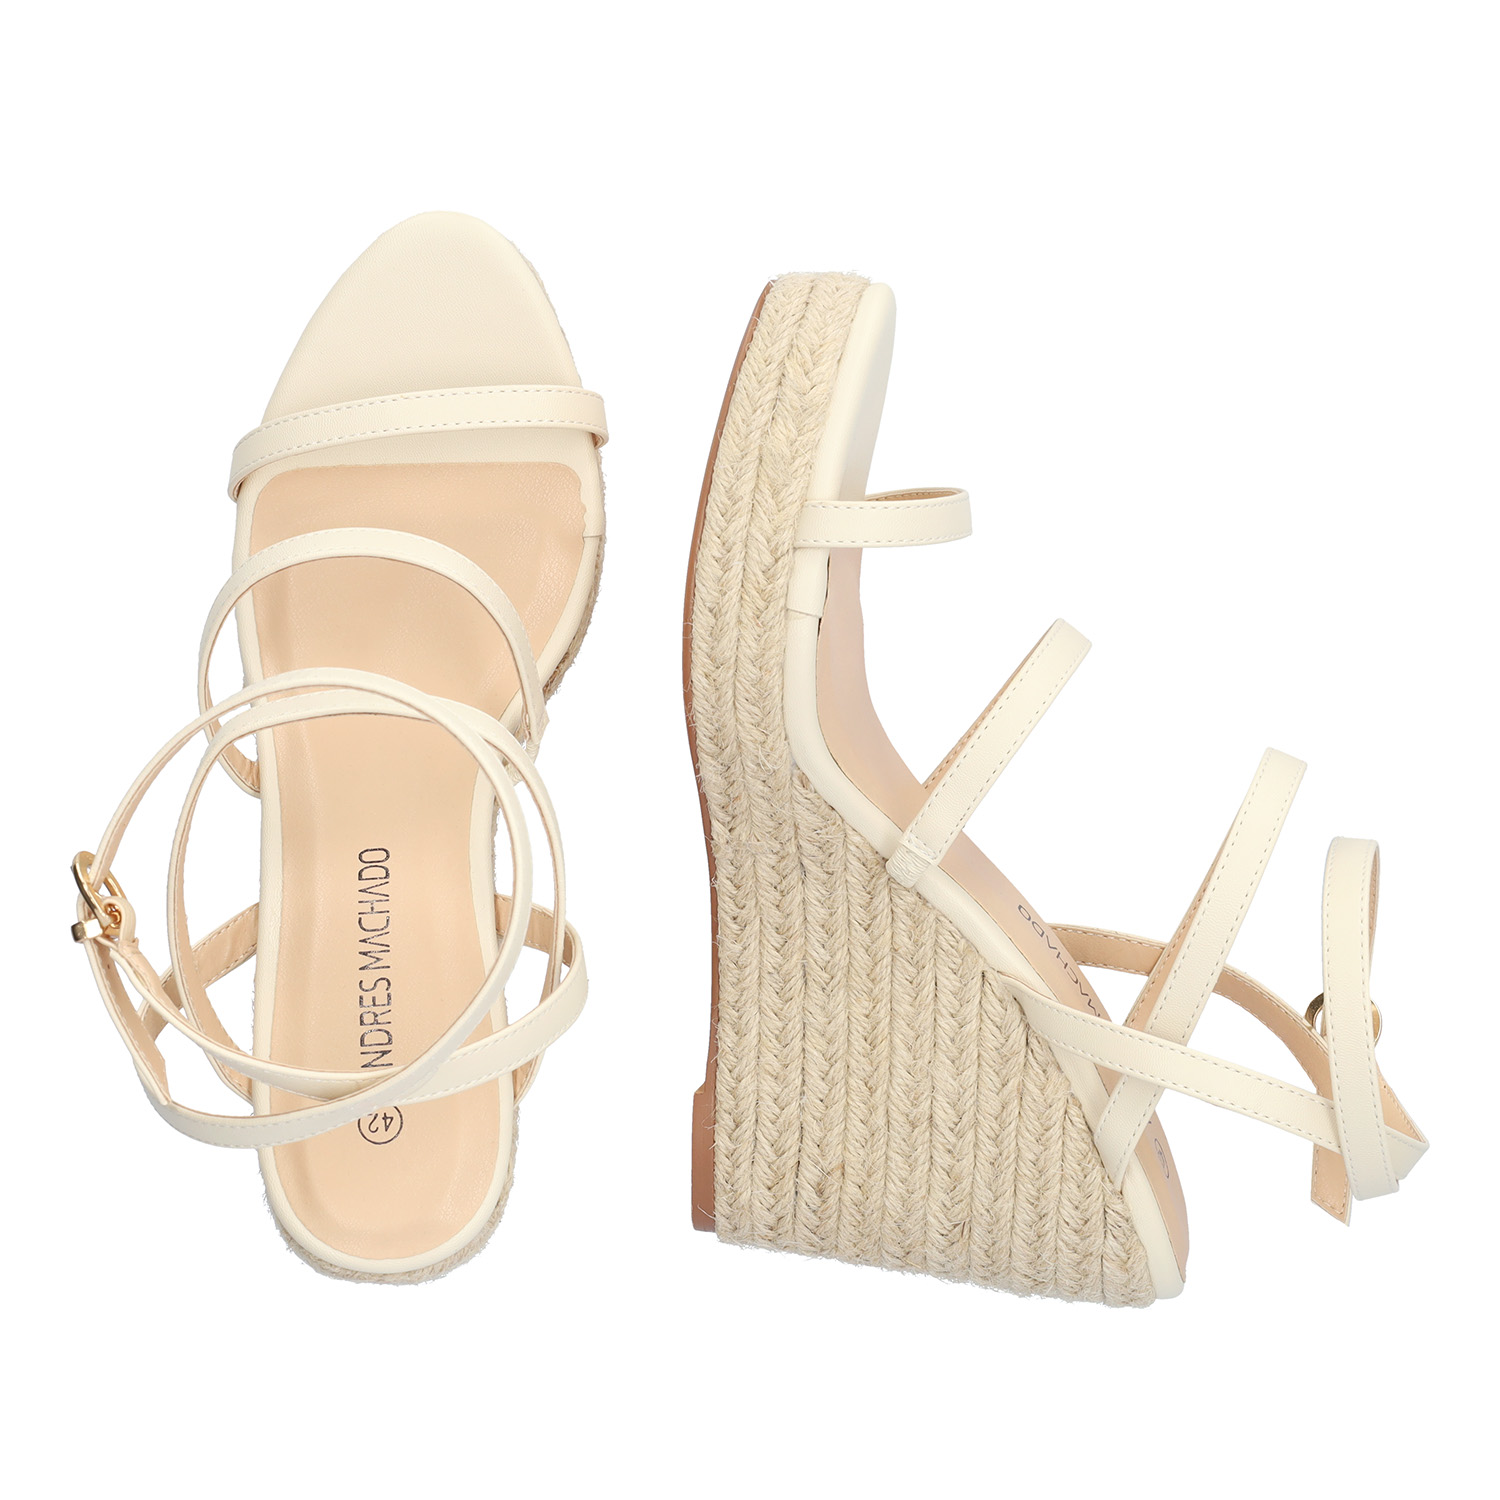 Beige soft fabric sandal with a jute wedge 